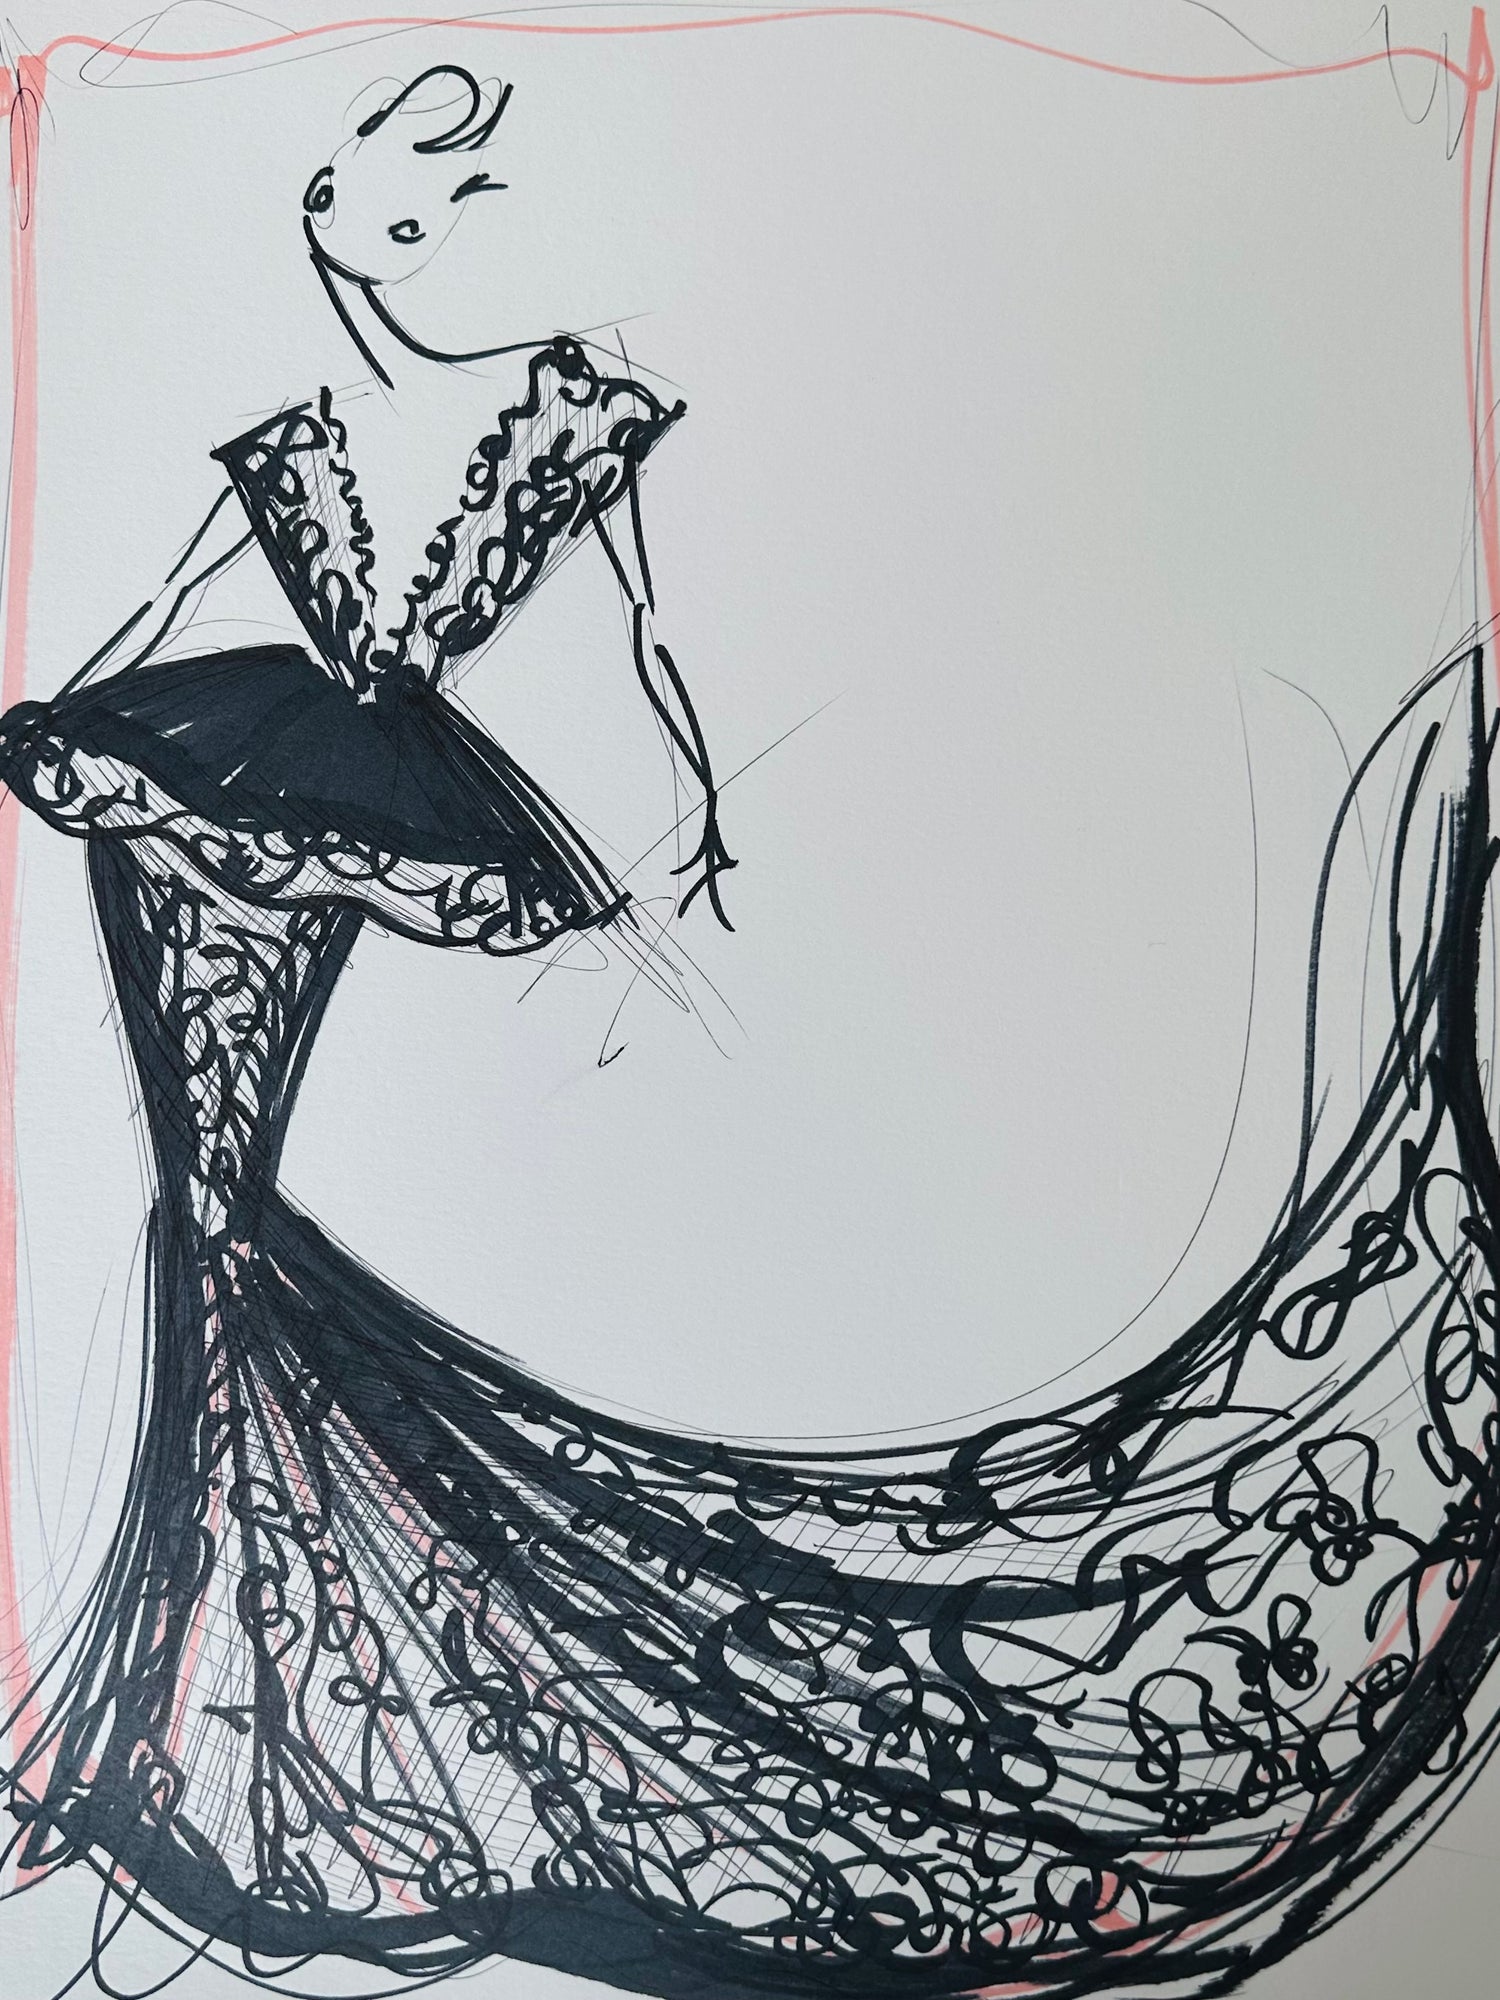 15th Anniversary Show Collection "Floral Lace Peplum Gown" - Original Sketch